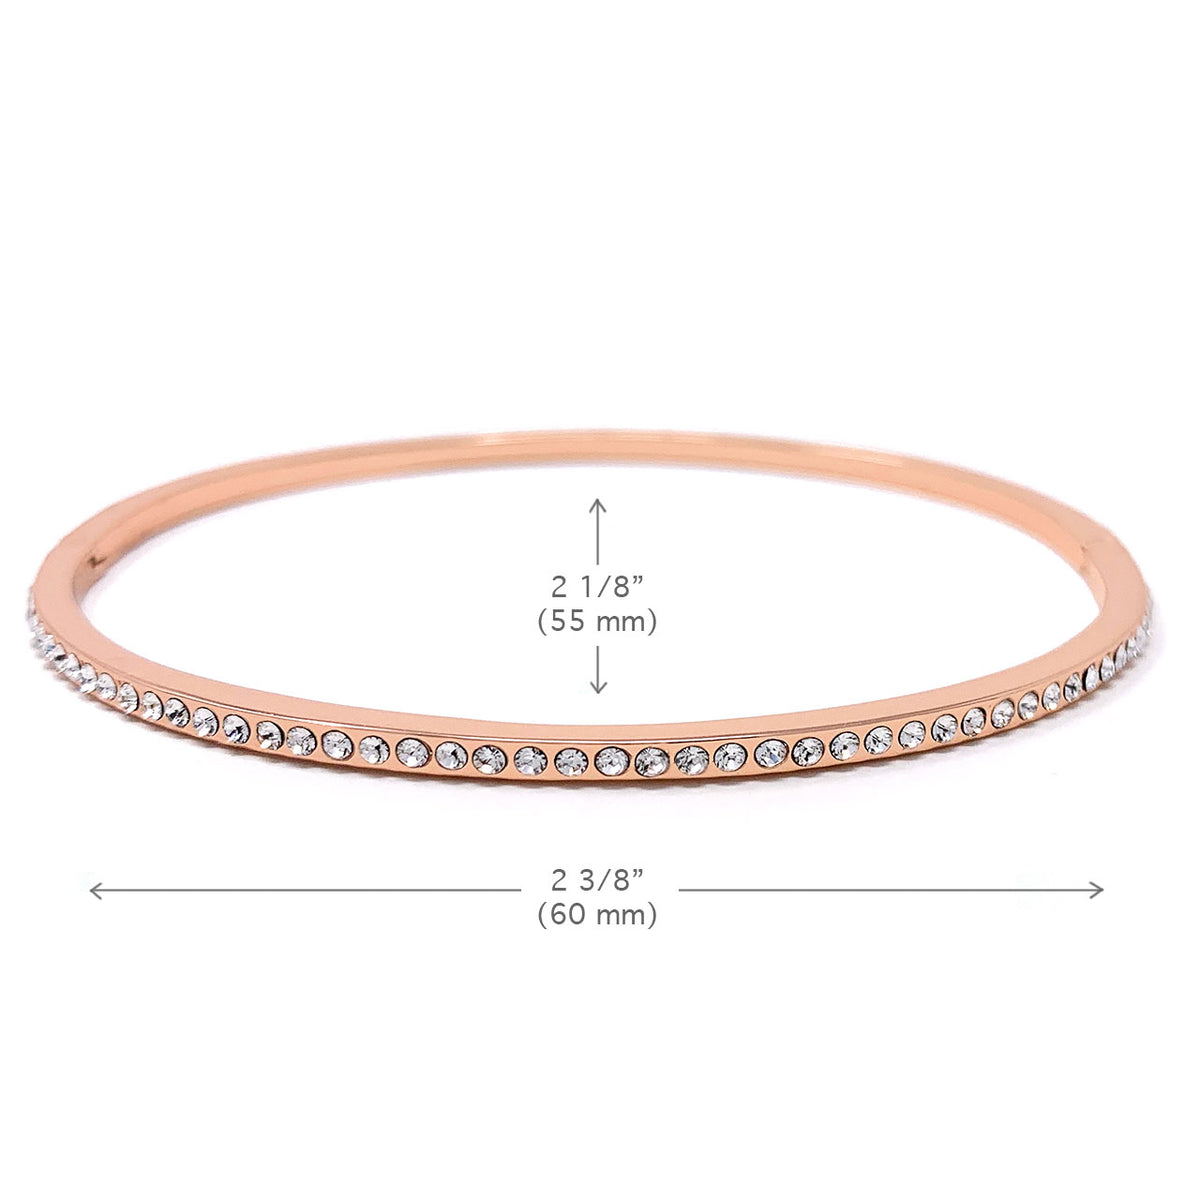 Amelia Pave Bangle Bracelet with White Clear Round Crystals from Swarovski Rose Gold Plated - Ed Heart